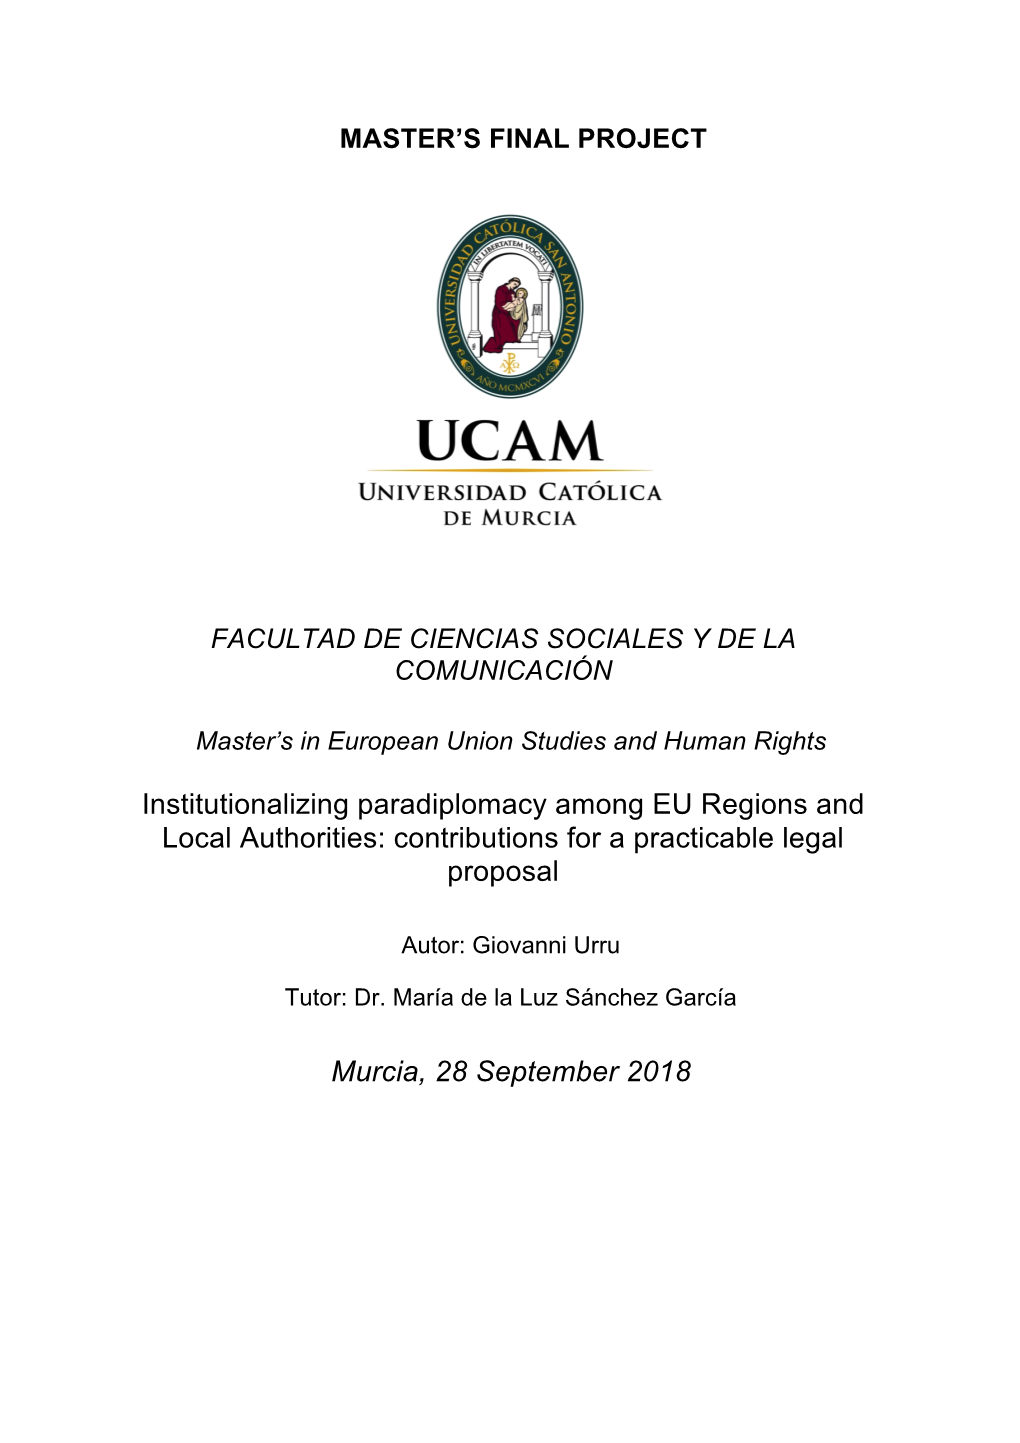 Institutionalizing Paradiplomacy Among EU Regions and Local Authorities: Contributions for a Practicable Legal Proposal